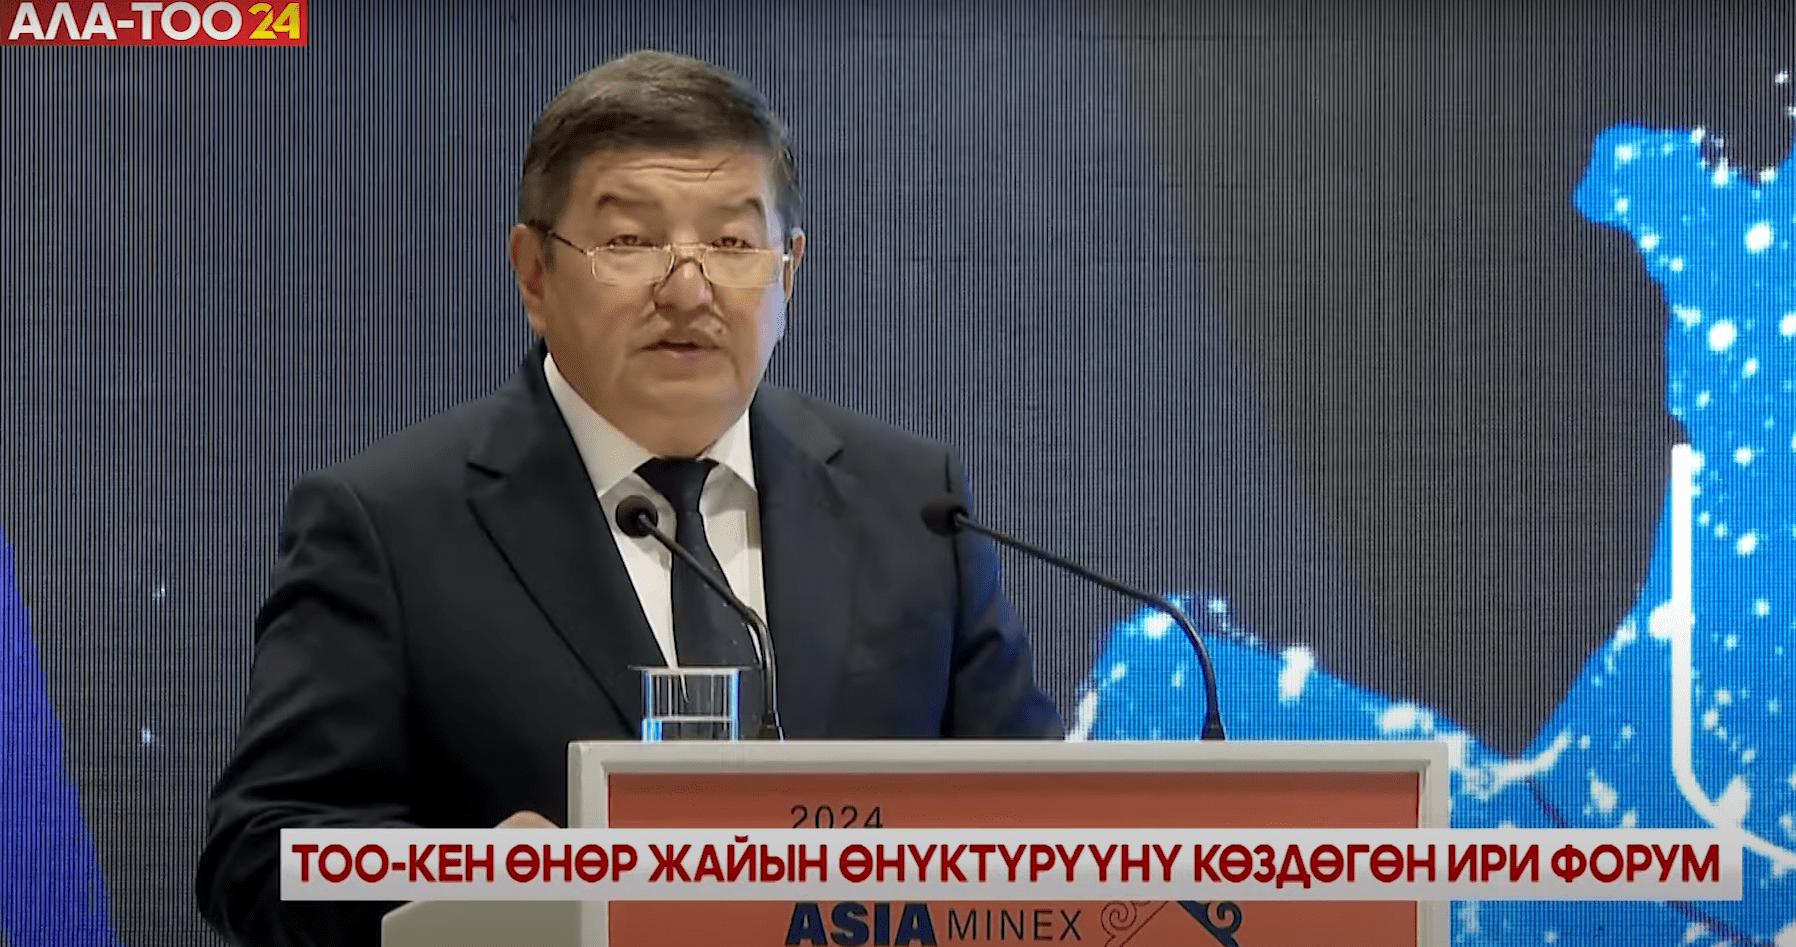 Chairman of the Cabinet of Ministers Akylbek Japarov opens the 10th “MINEX Central Asia” Mining and Exploration Forum in Bishkek